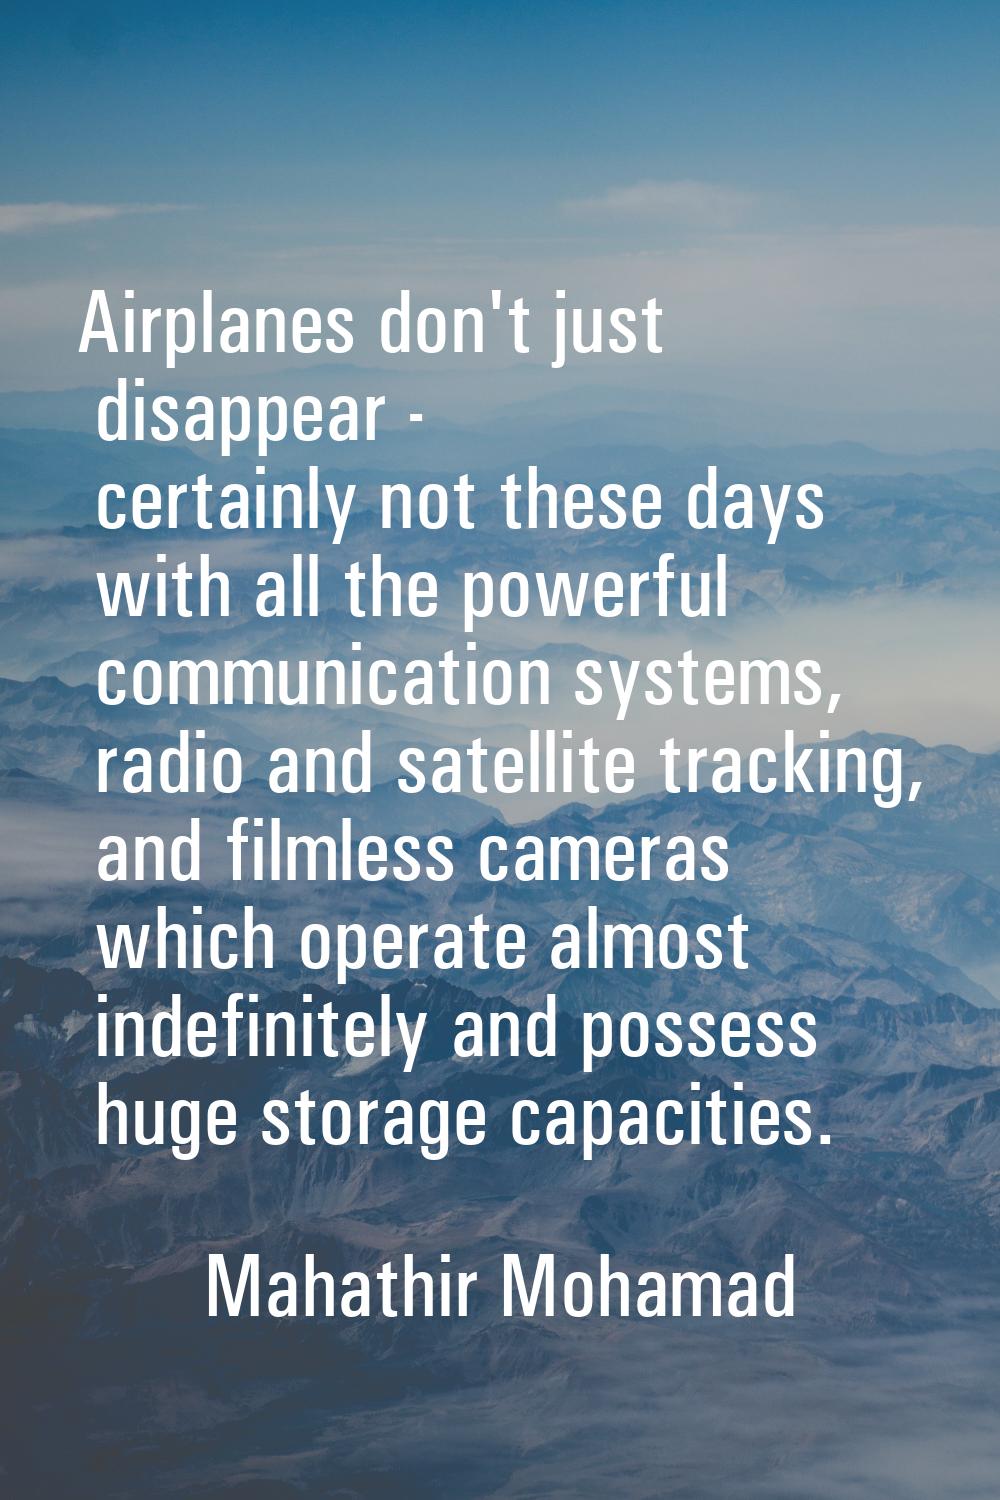 Airplanes don't just disappear - certainly not these days with all the powerful communication syste